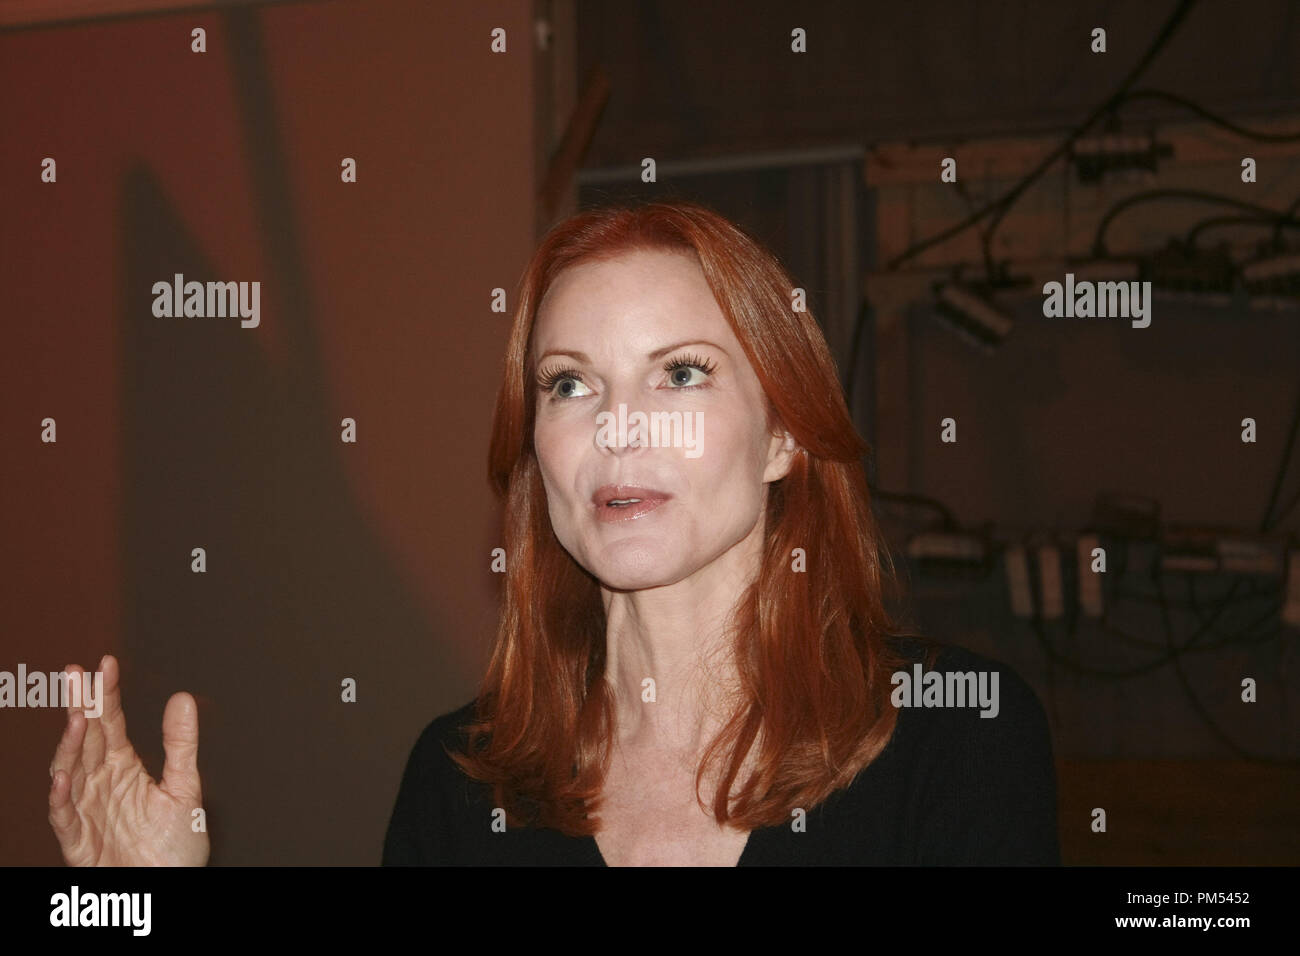 Marcia Cross 'Desperate Housewives'  Portrait Session, July 27, 2010.  Reproduction by American tabloids is absolutely forbidden. File Reference # 30383 013JRC  For Editorial Use Only -  All Rights Reserved Stock Photo